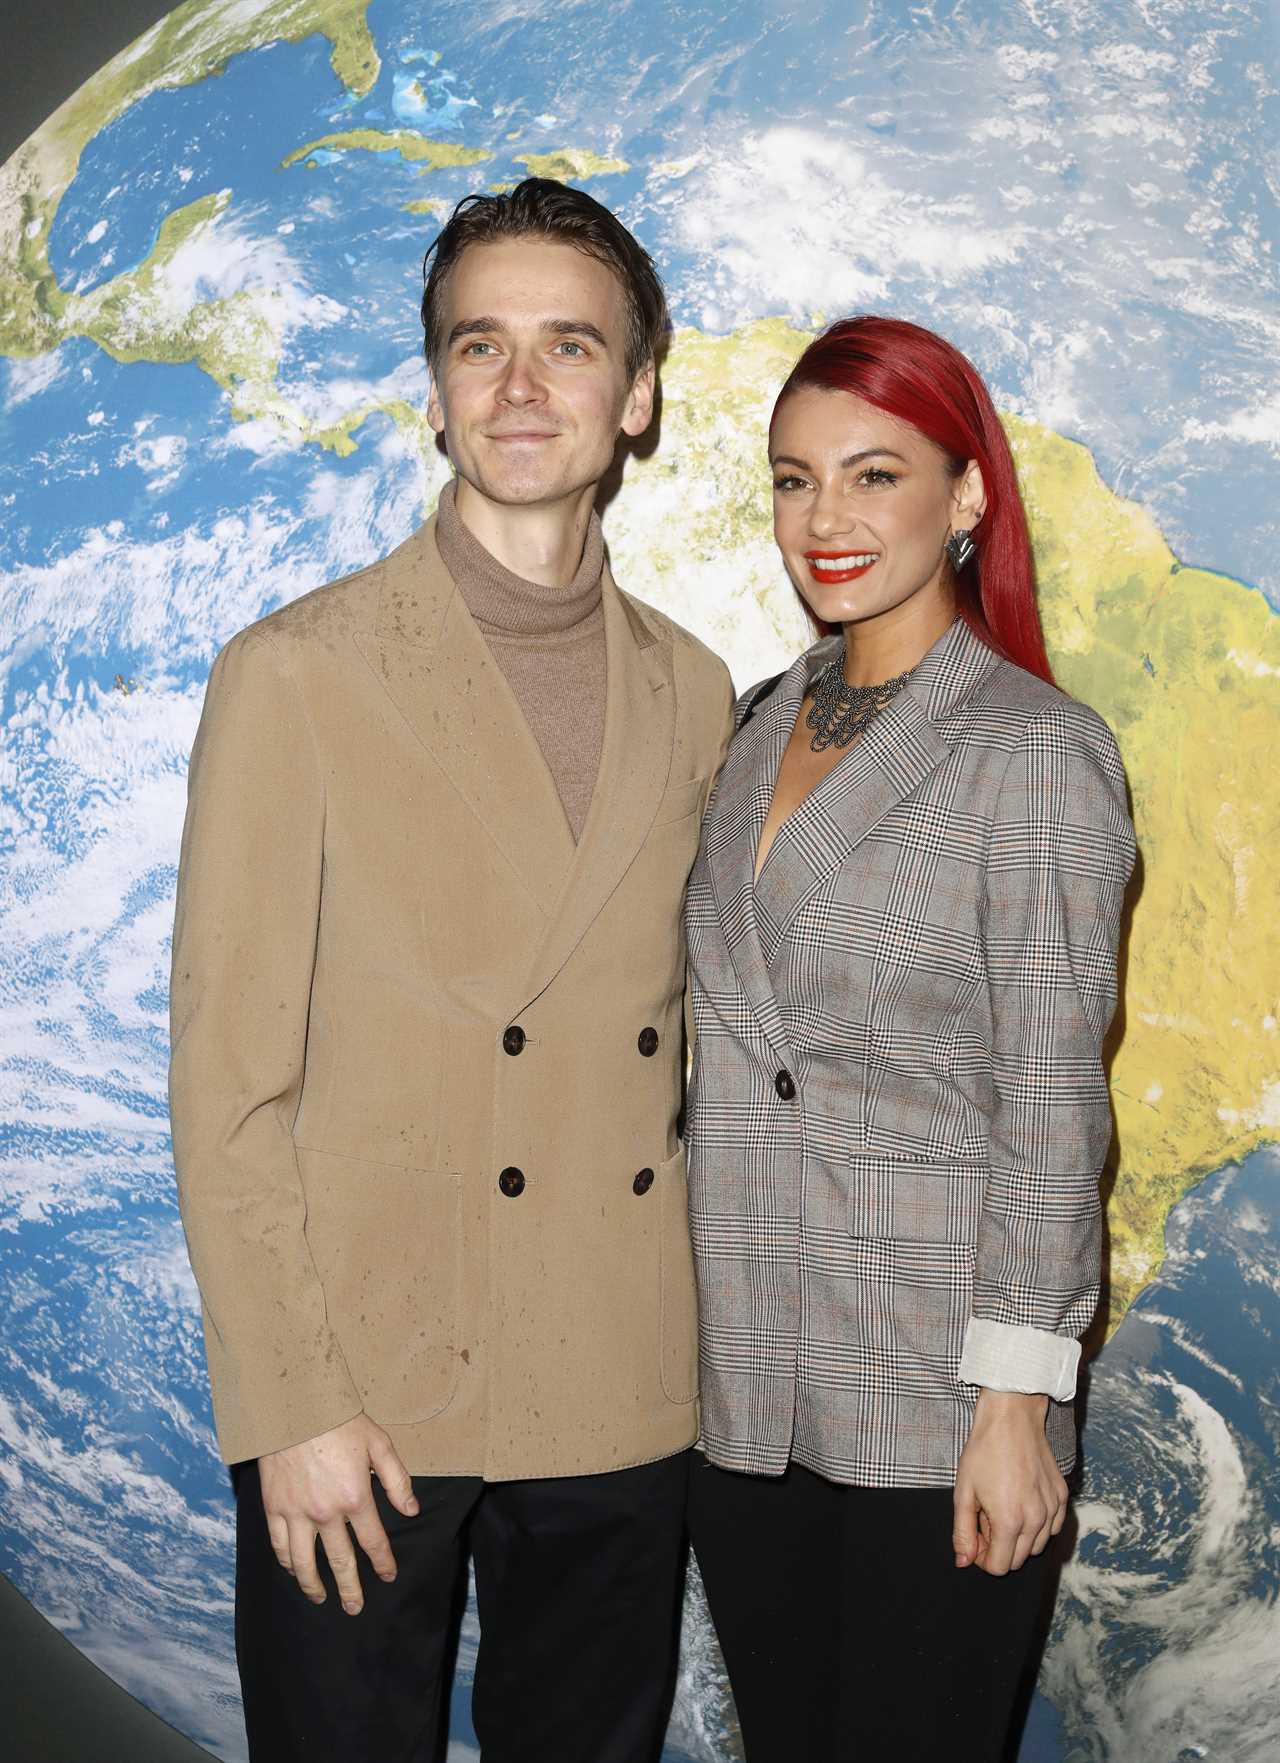 Joe Sugg and Dianne Buswell cosy up at BBC Earth event after split rumours